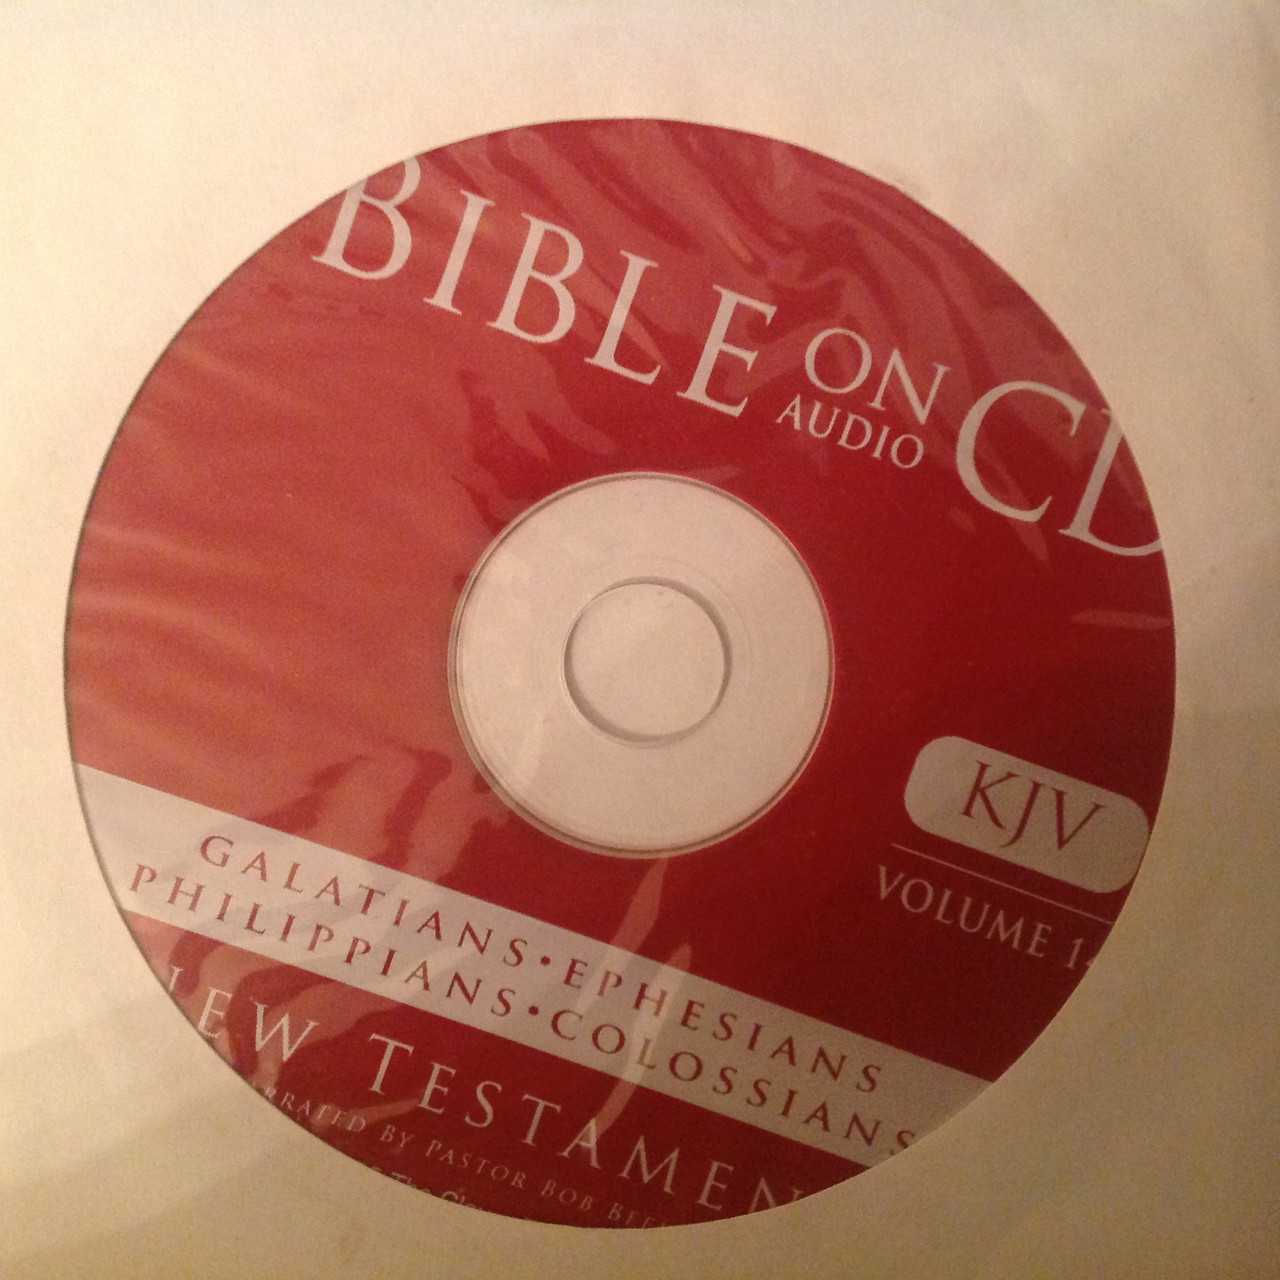 Bible On Audio Cd Vol 14 Galatians Ephesians Philippians Colossians Cd Confraternity Of 6041